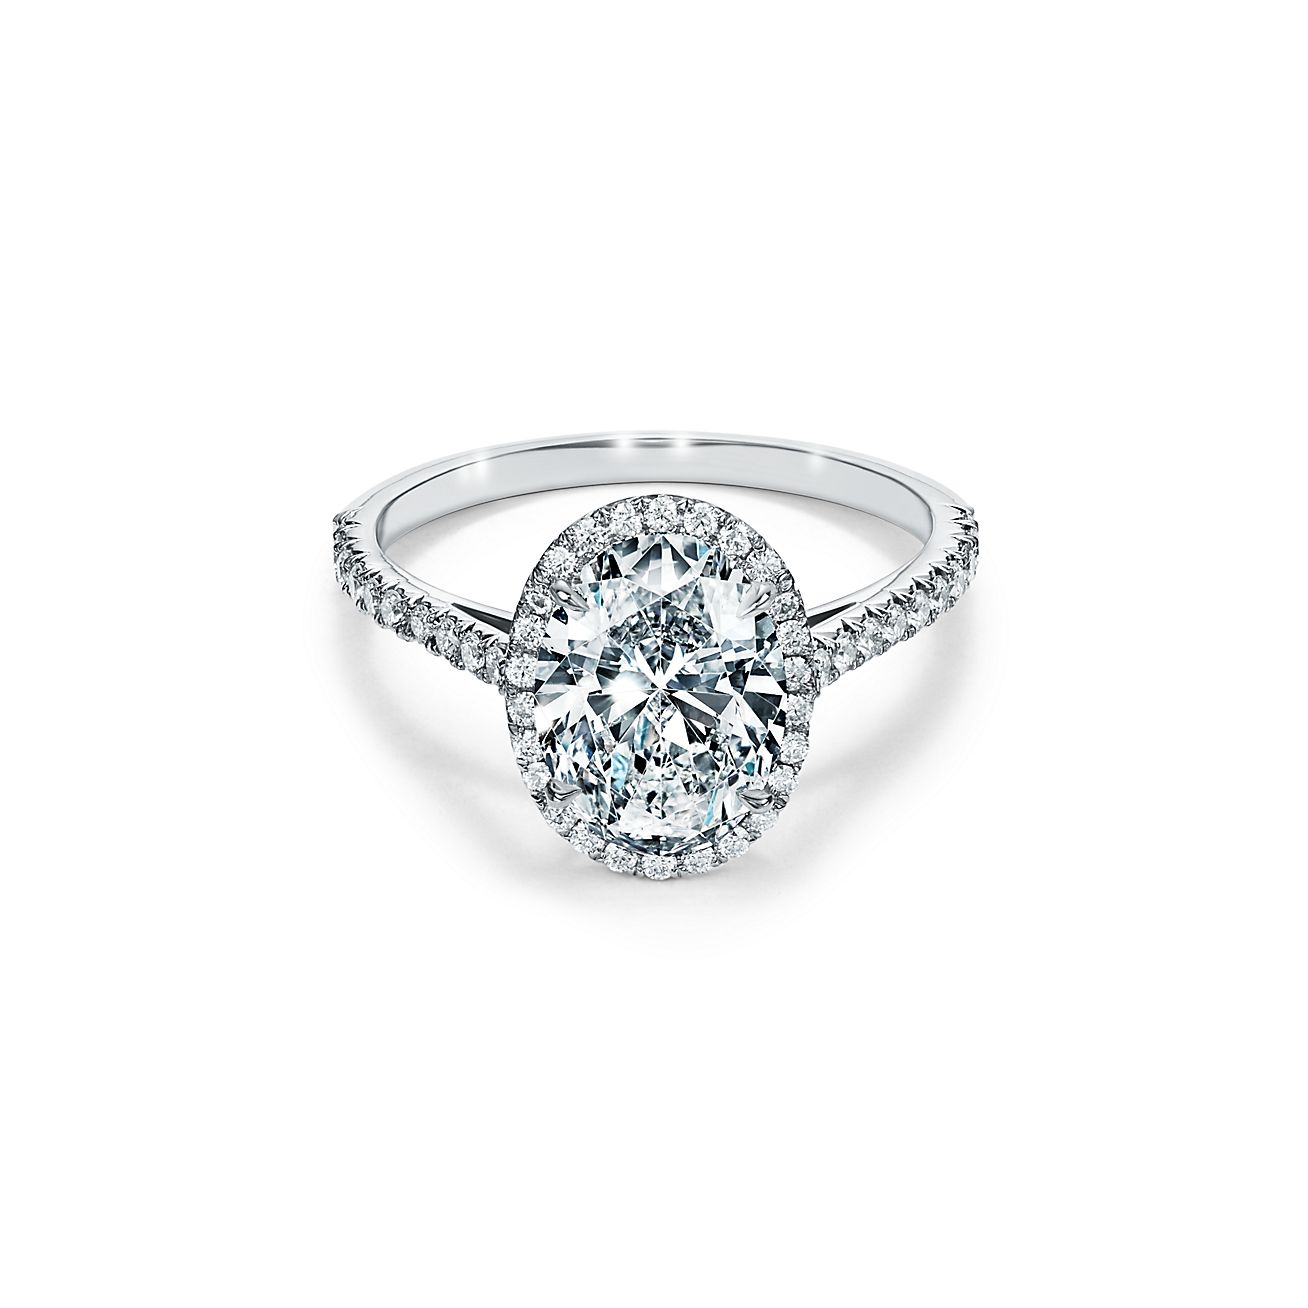 Halo Engagement Ring With A Diamond Band In Platinum